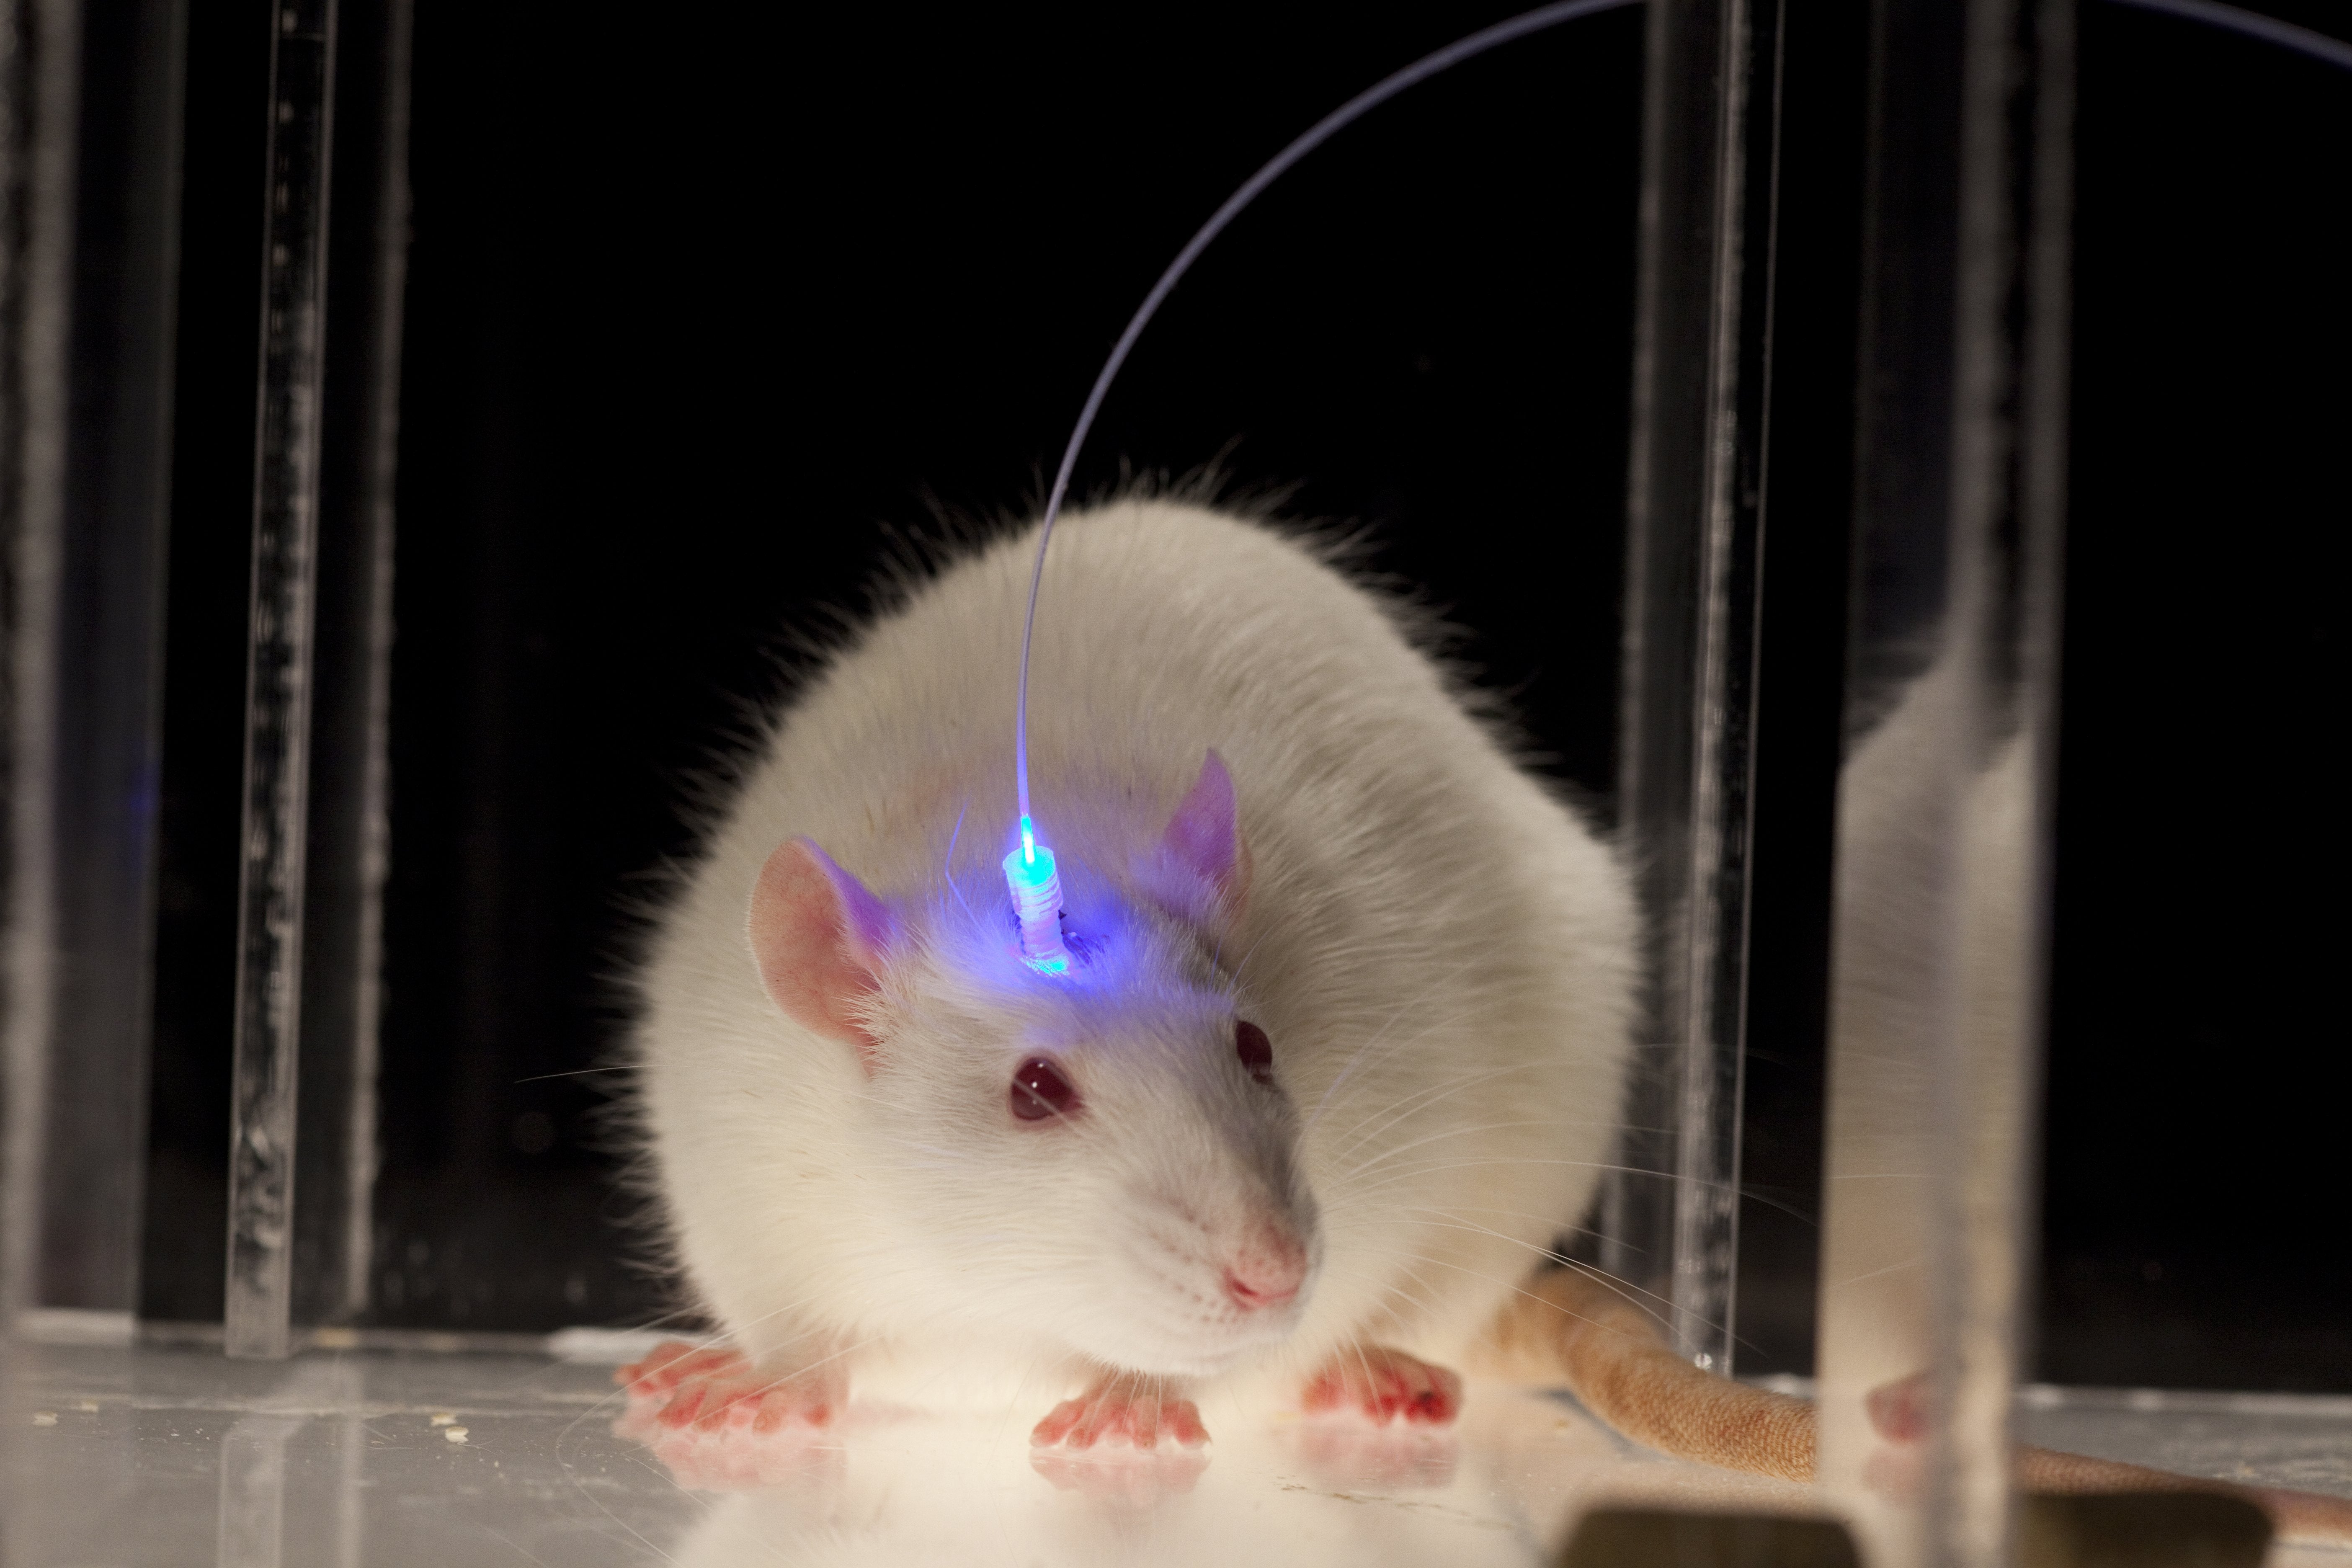 How to Make a Mouse Hallucinate - Scientific American